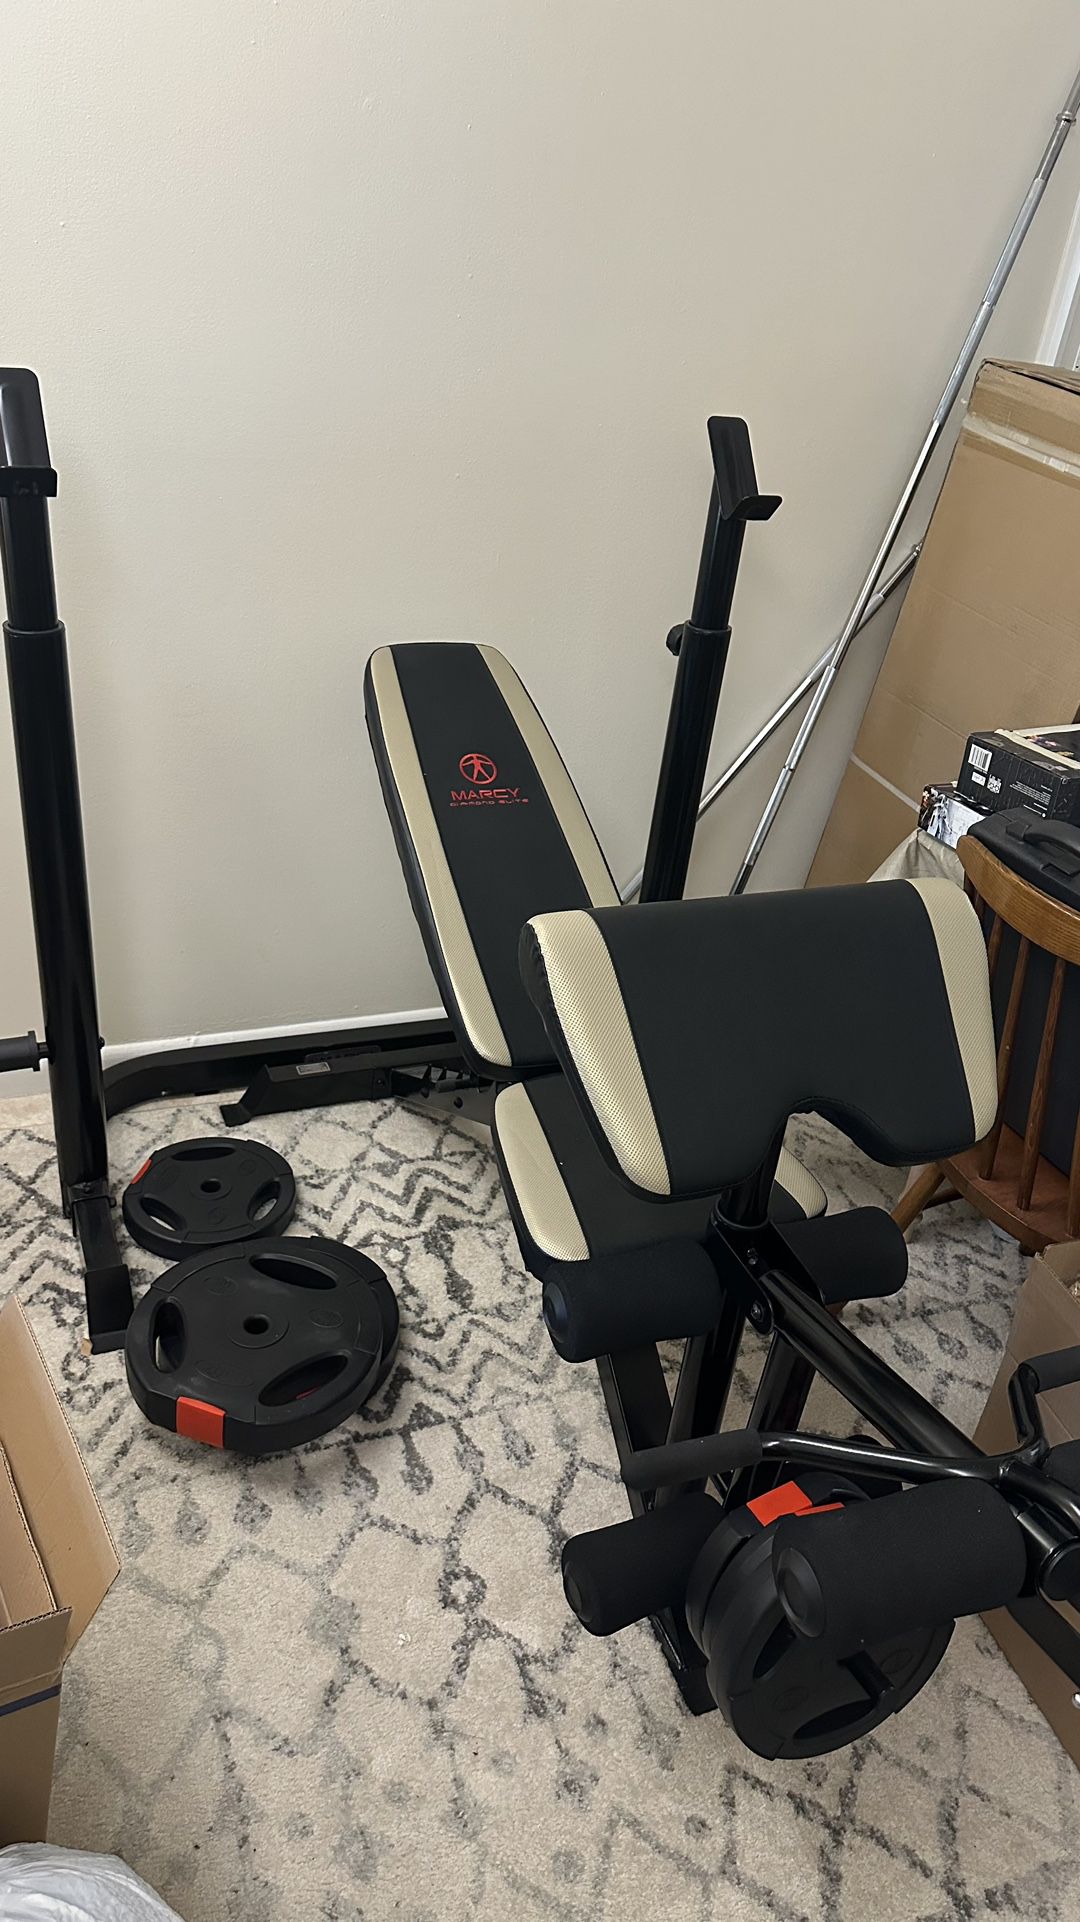 Weight Bench, Weights, and Barbells